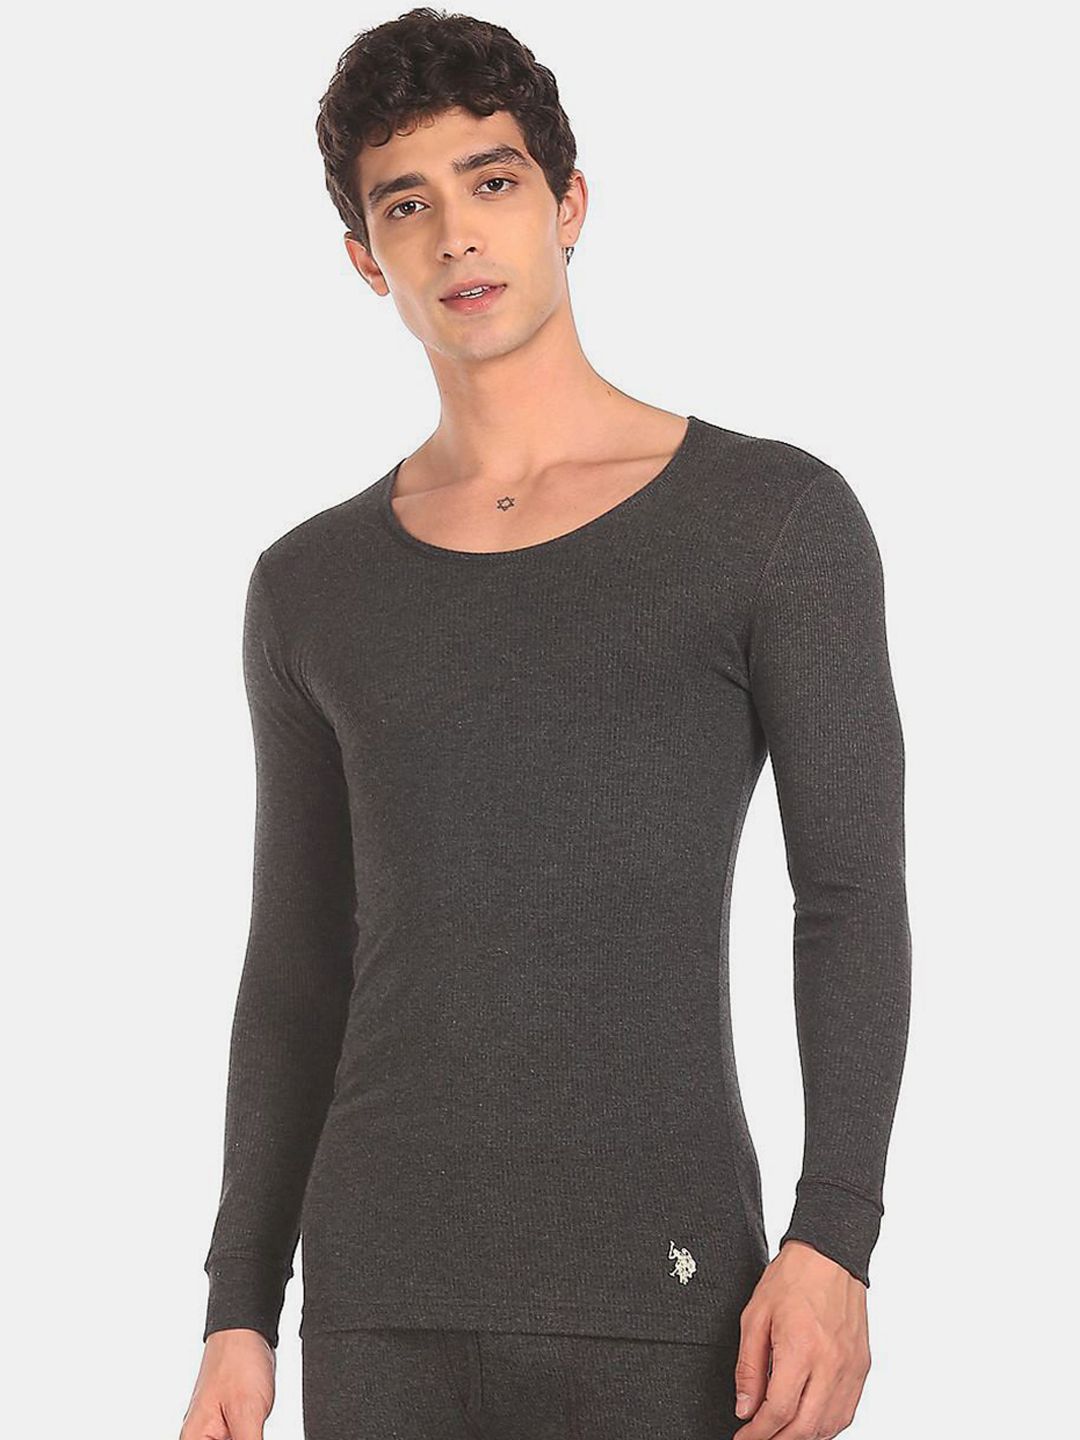 U.S. Polo Assn. Men's Charcoal Grey Solid Thermal Tops Price in India